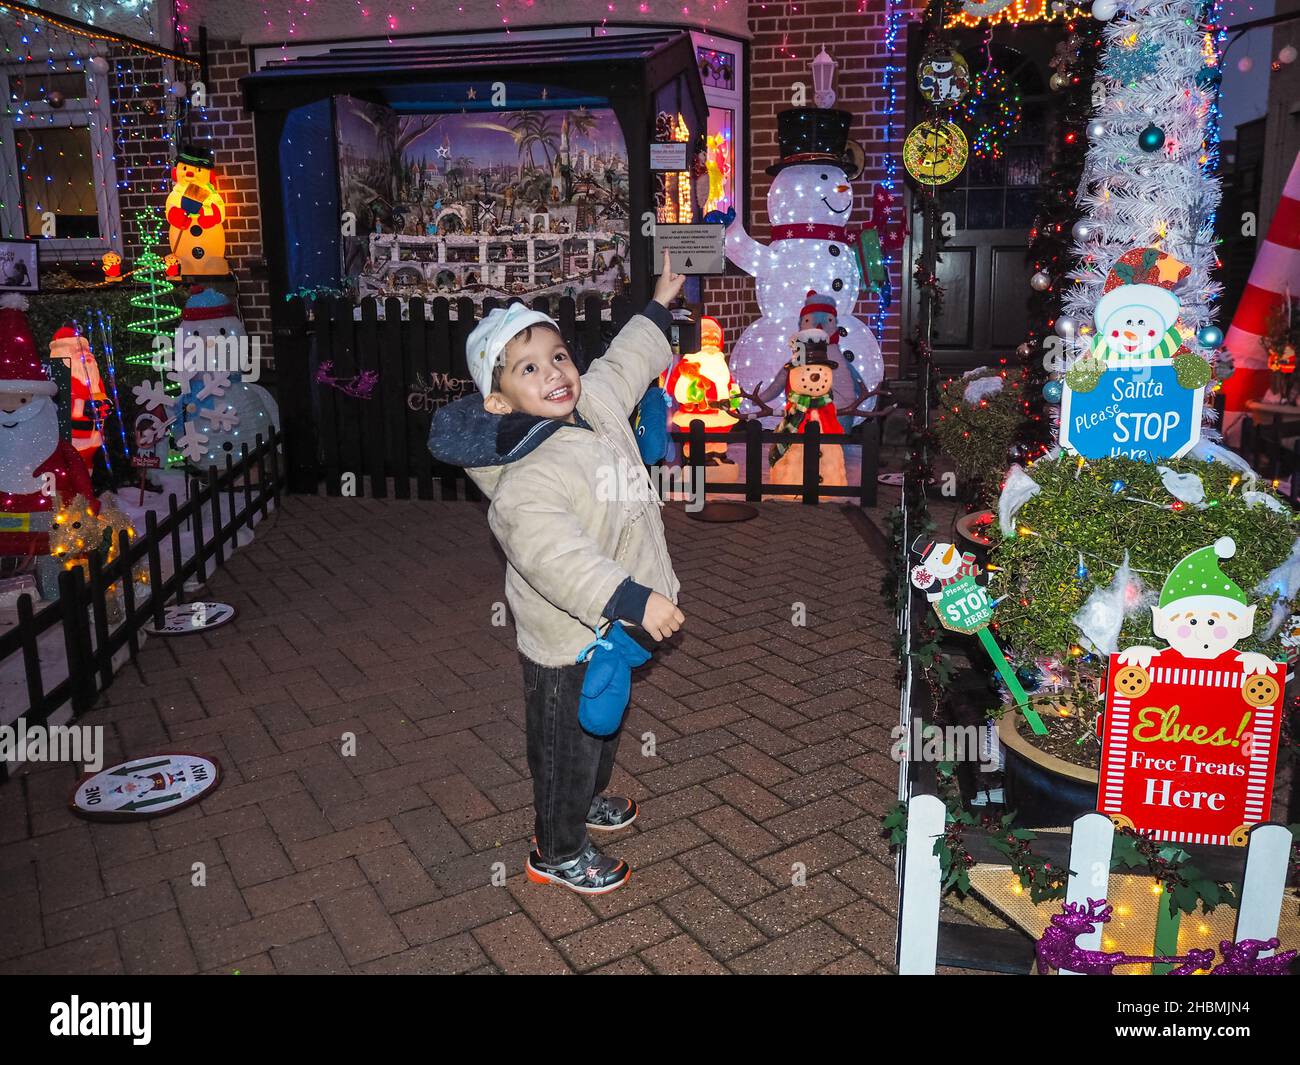 3 year old Jenson Holt Tsang enjoys the  Christmas House lights in Croxley Green - Charity Christmas House in Winton Drive, Croxley Green, Hertfordshire England, decorated by husband & wife Mr & Mrs Eleno & Margaret Pulis. Mr Eleno Pulis states that it  took 5 weeks to decorate entire house to raise money for local charity Watford Mencap and Great Ormond Street Hospital. They aim to raise over £1000 through their just giving page: https://www.justgiving.com/fundraising/margaret-pulis Stock Photo